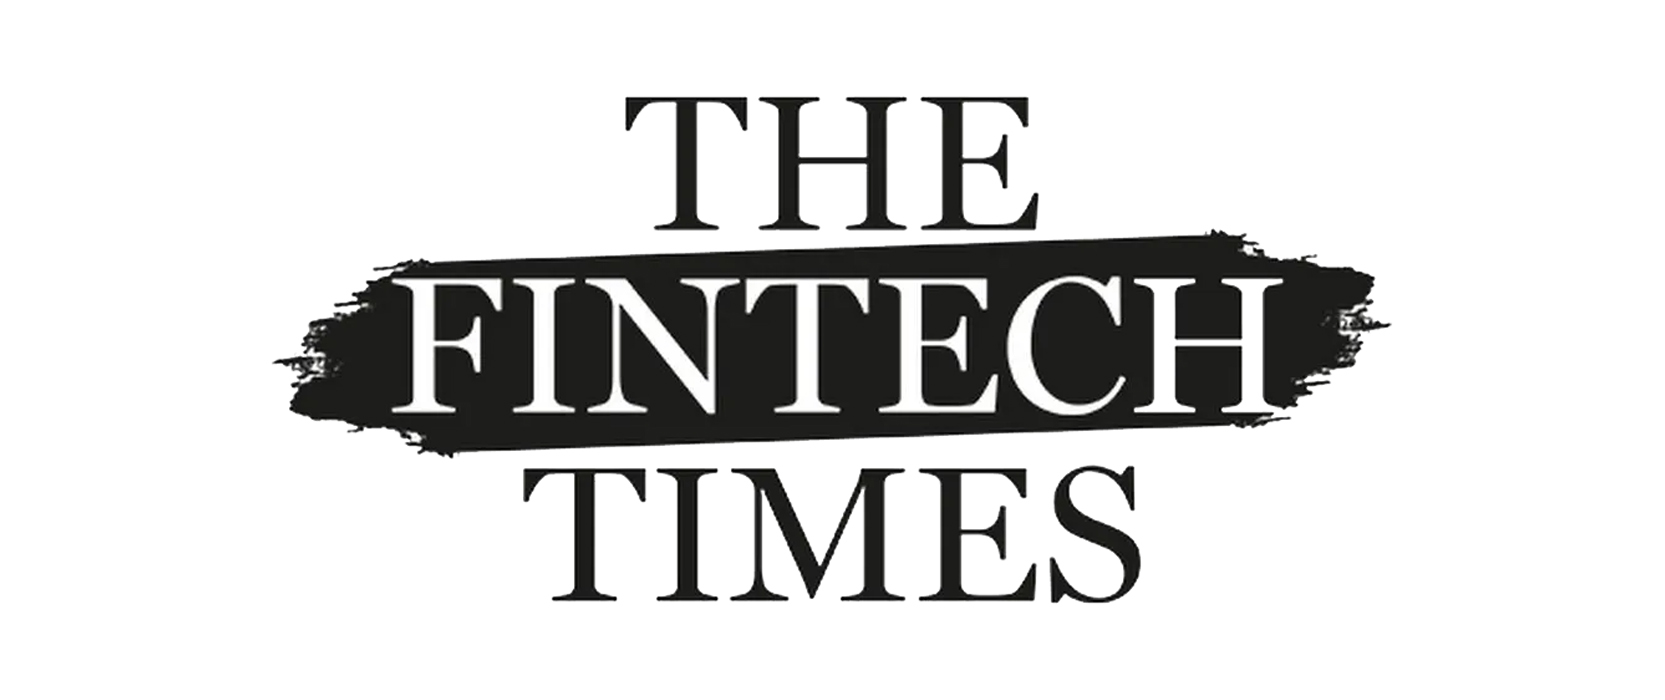 The Fintecth Times logo